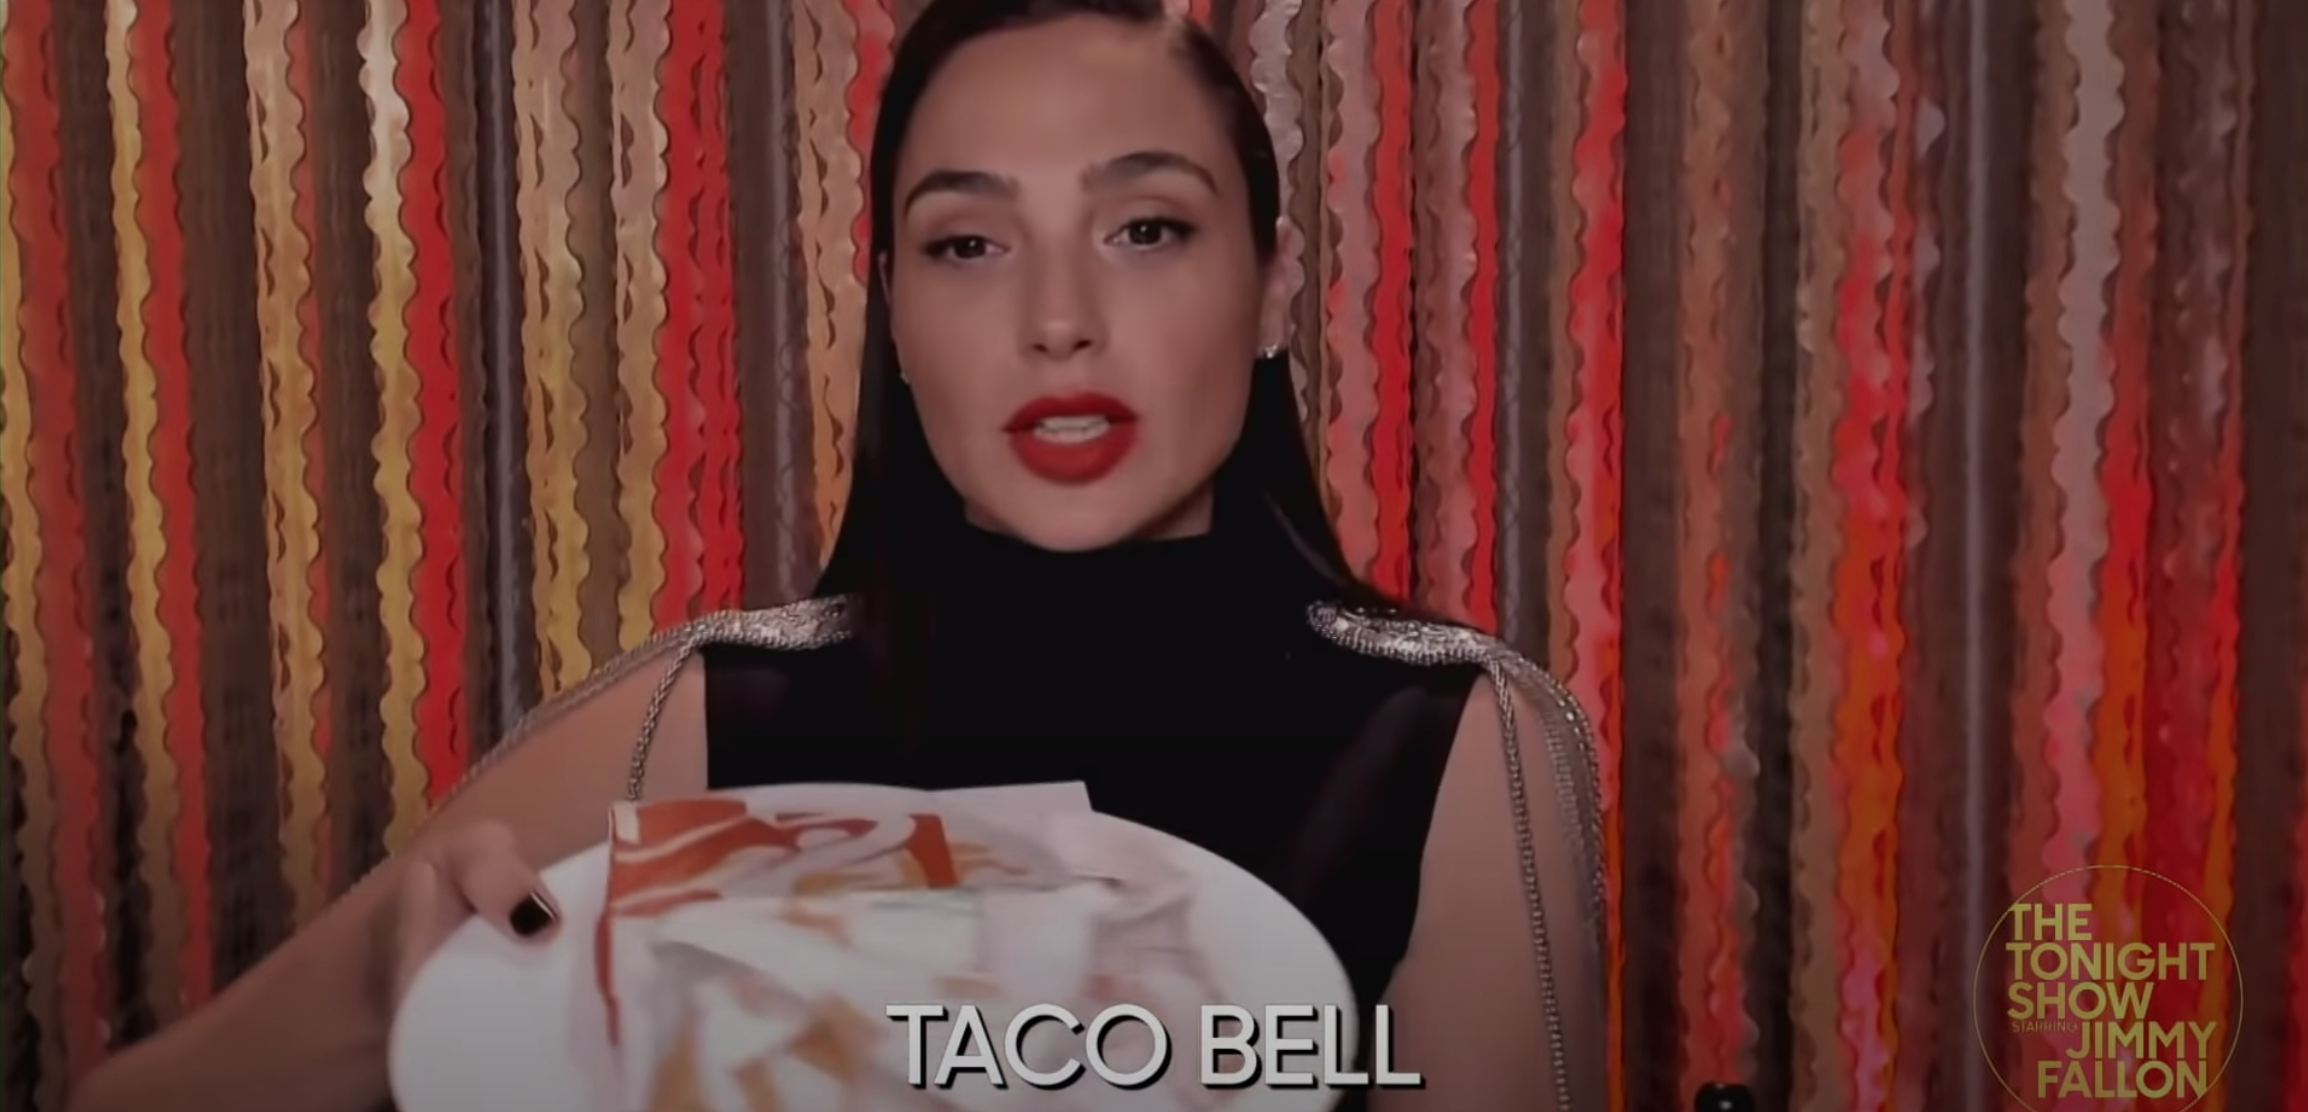 Gal Gadot holds up a plate of wrapped tacos from Taco Bell